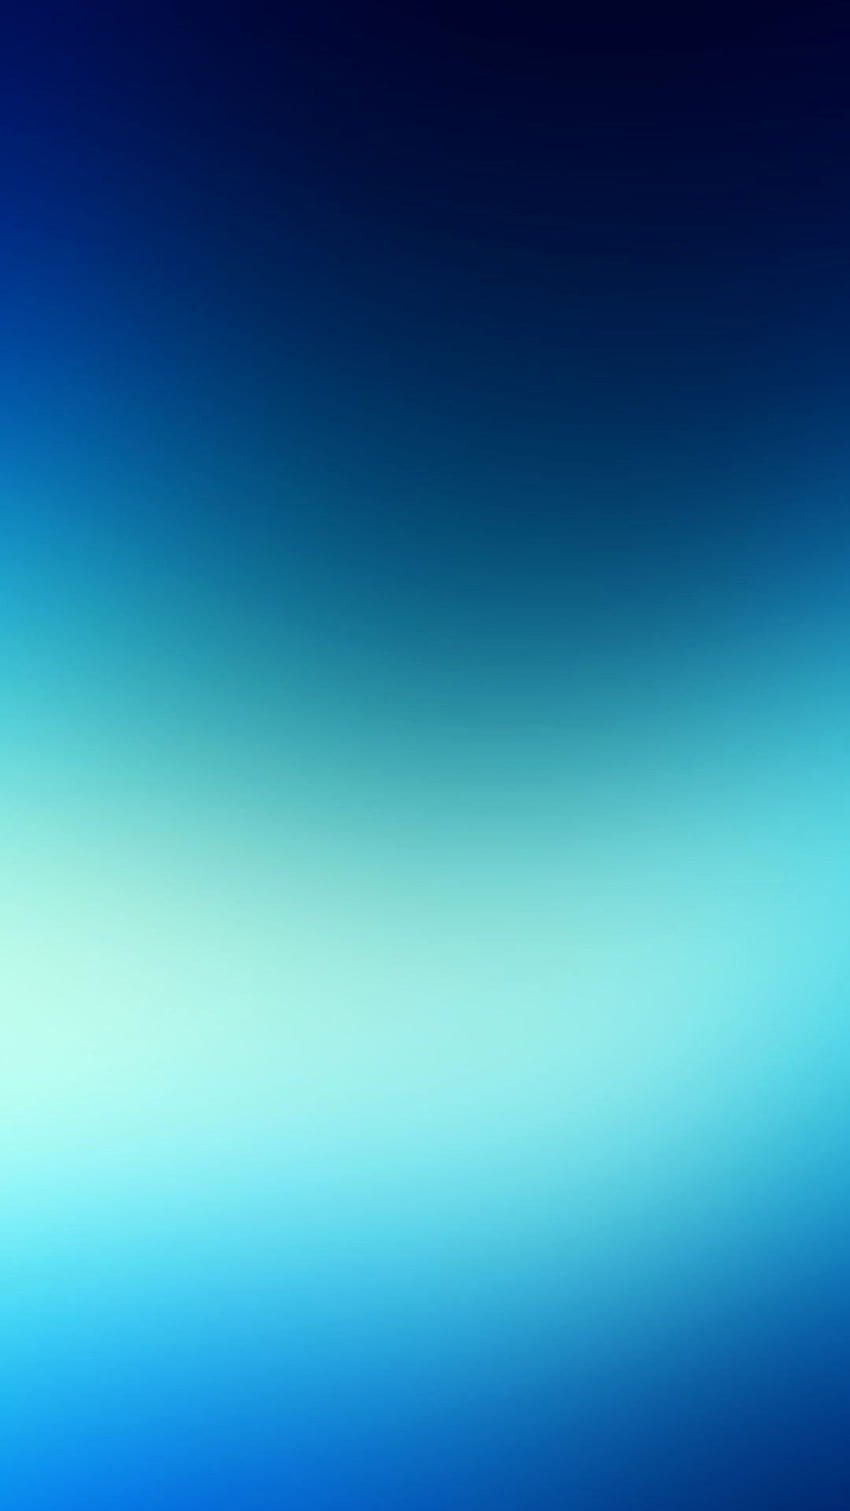 Blue iPhone Backgrounds Awesome Blue Blur iPhone 6 Plus wallpaper ponsel HD